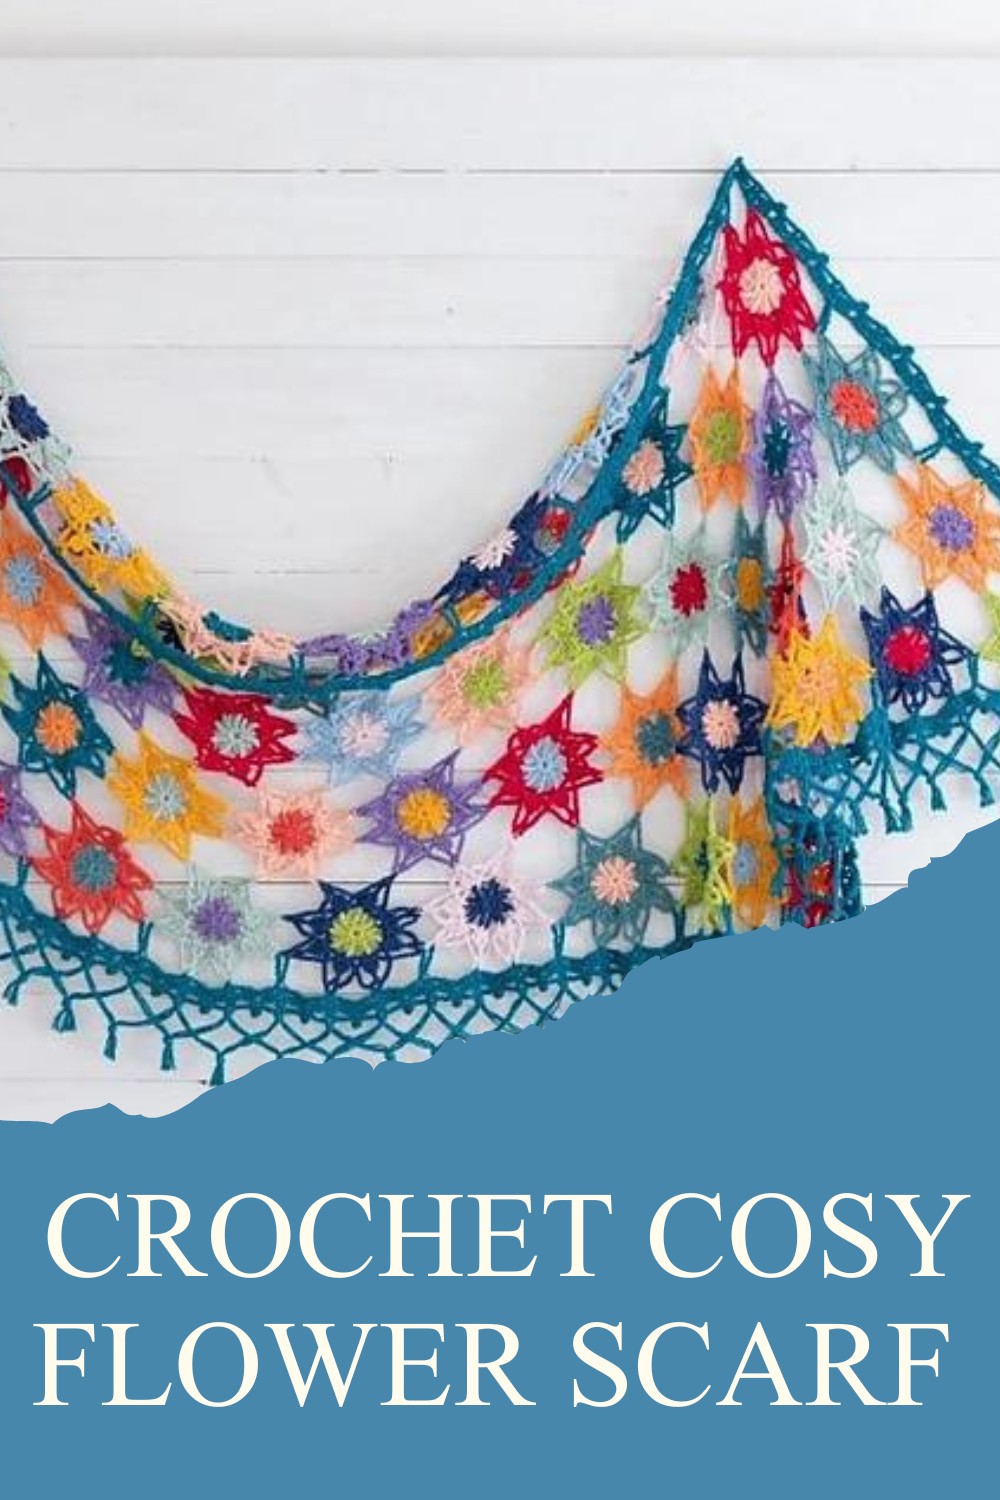 Crochet Colourful Cosy Flower Scarf Pattern